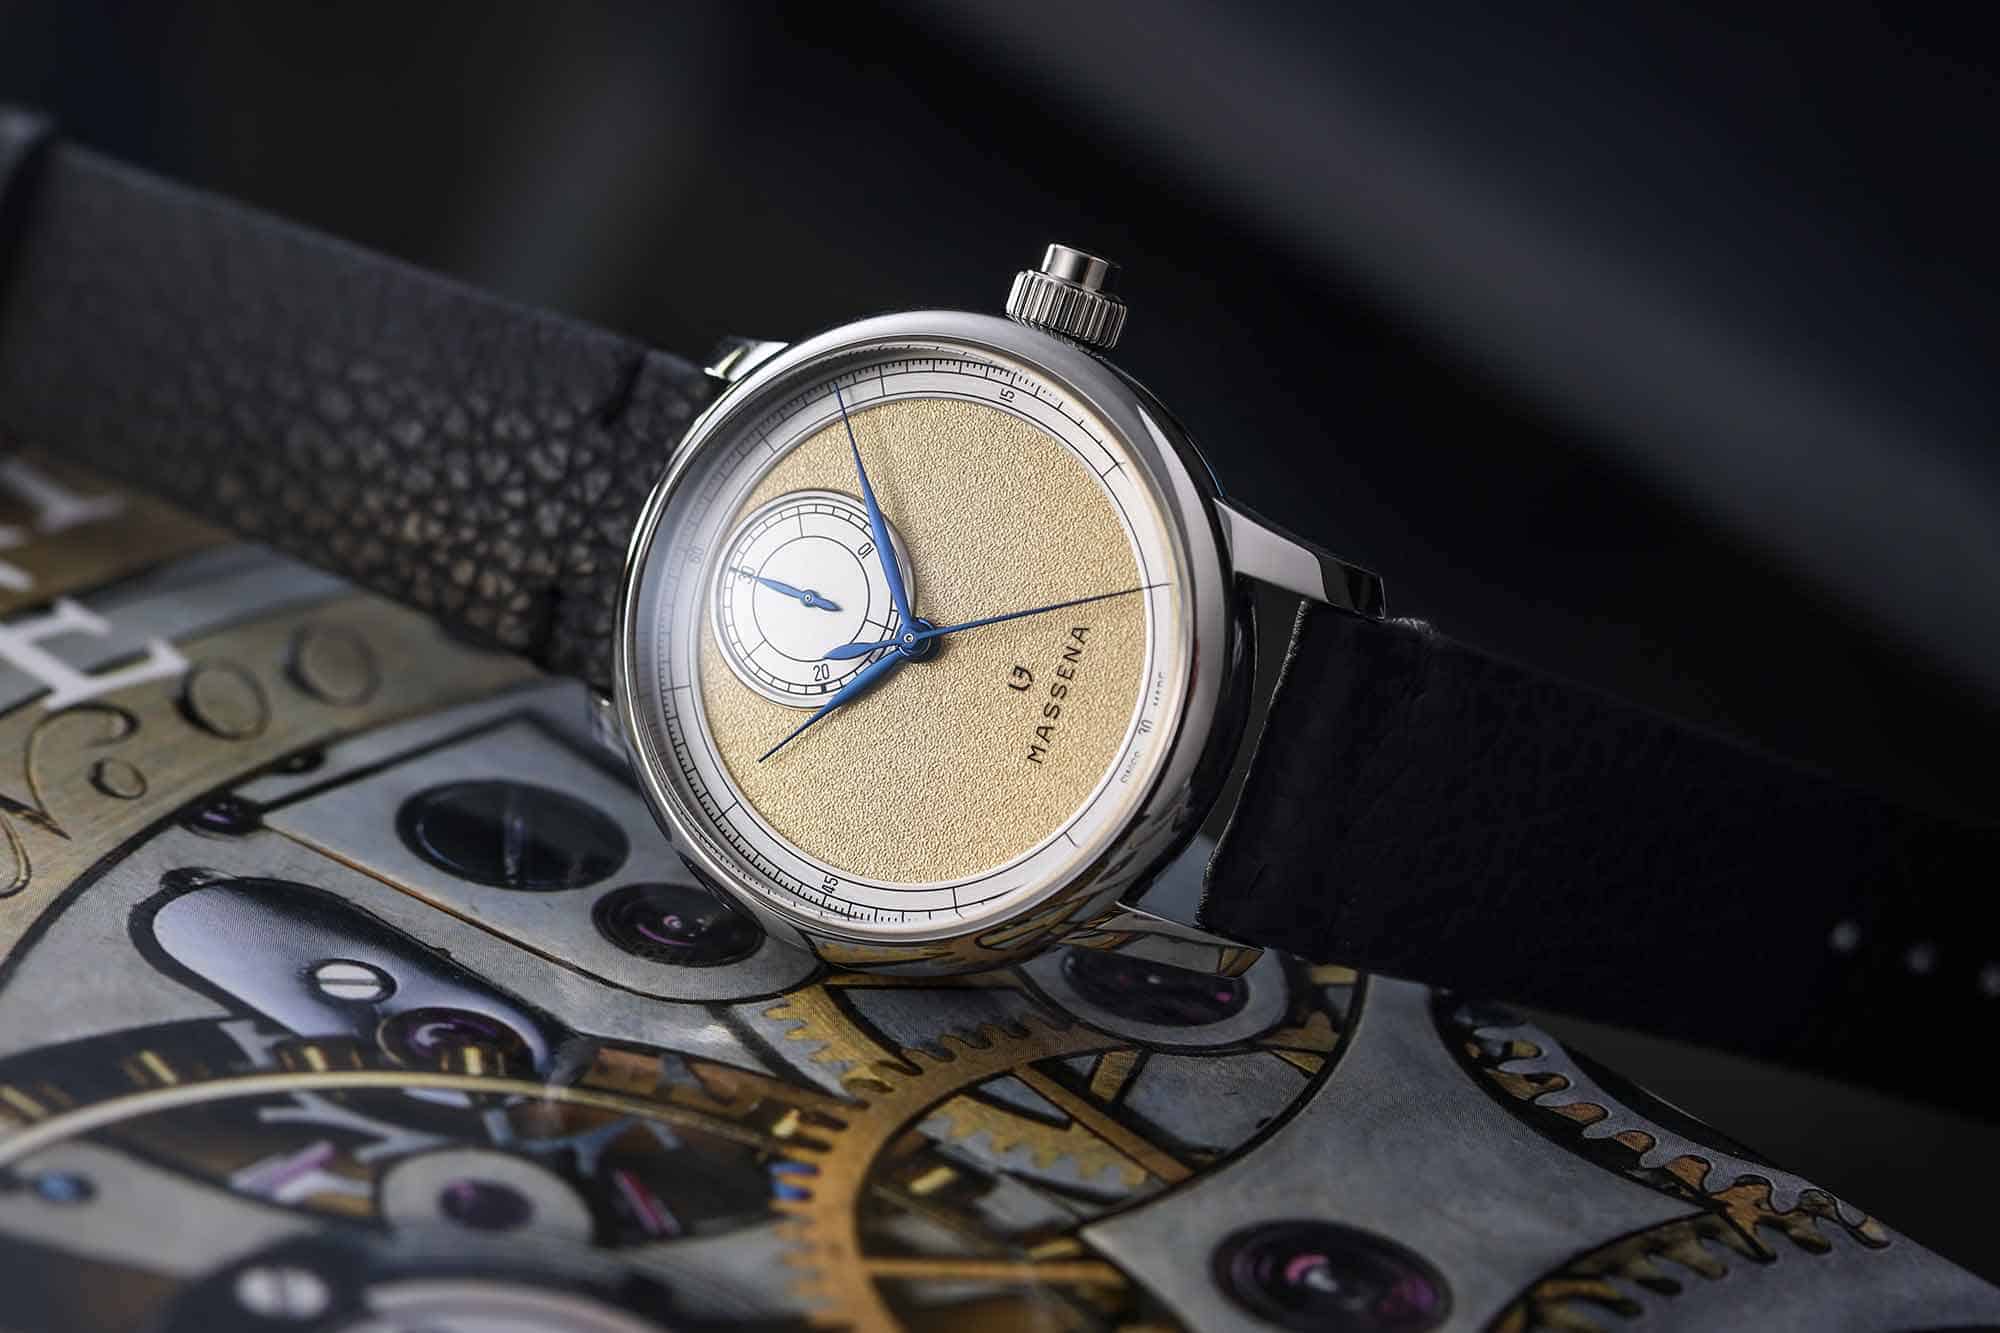 Louis Erard and Massena LAB Follow Up on Last Year’s Regulator with a New Monopusher Chronograph